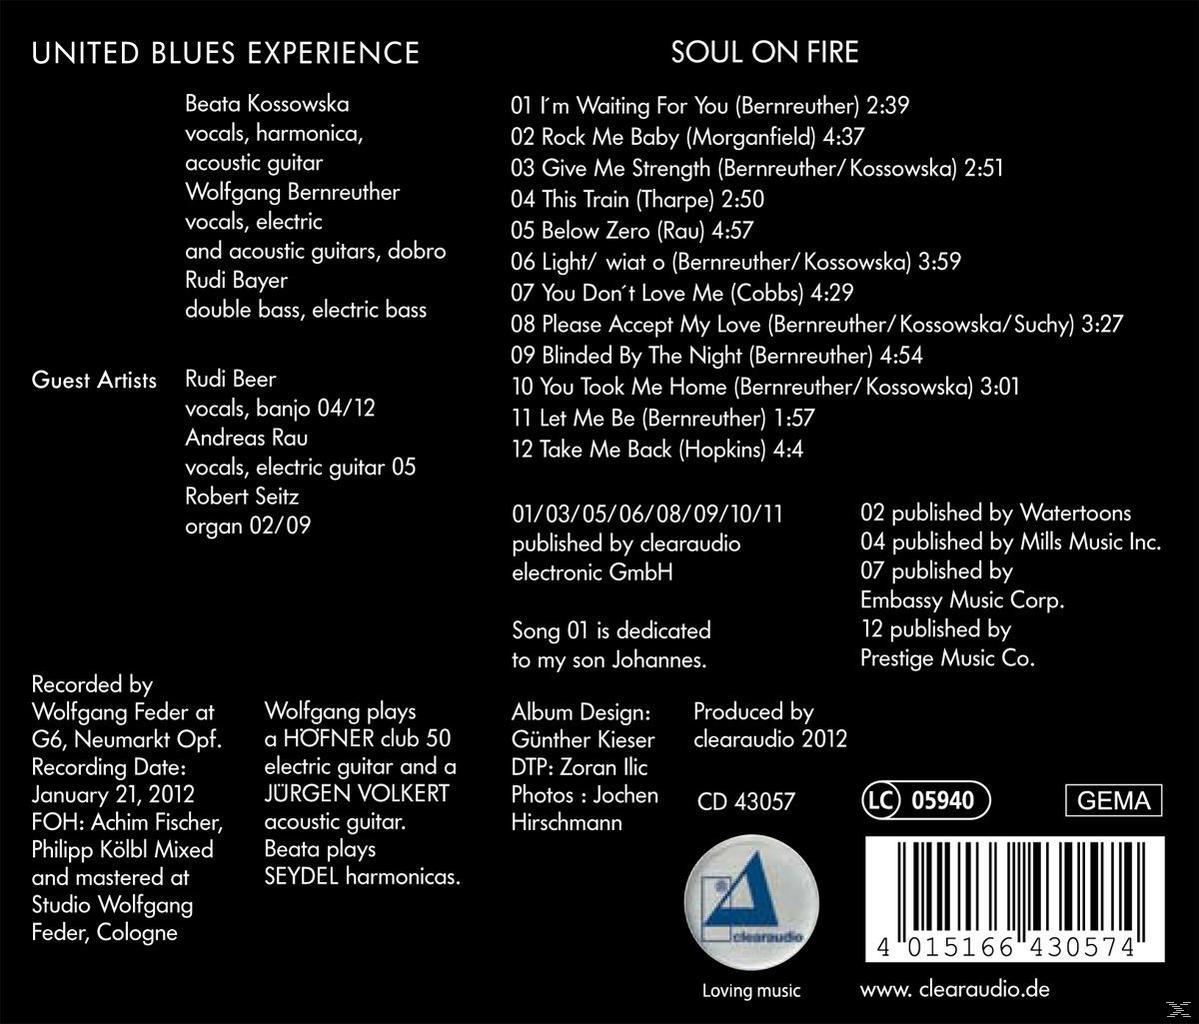 (CD) On Experience - Fire Soul - Blues United